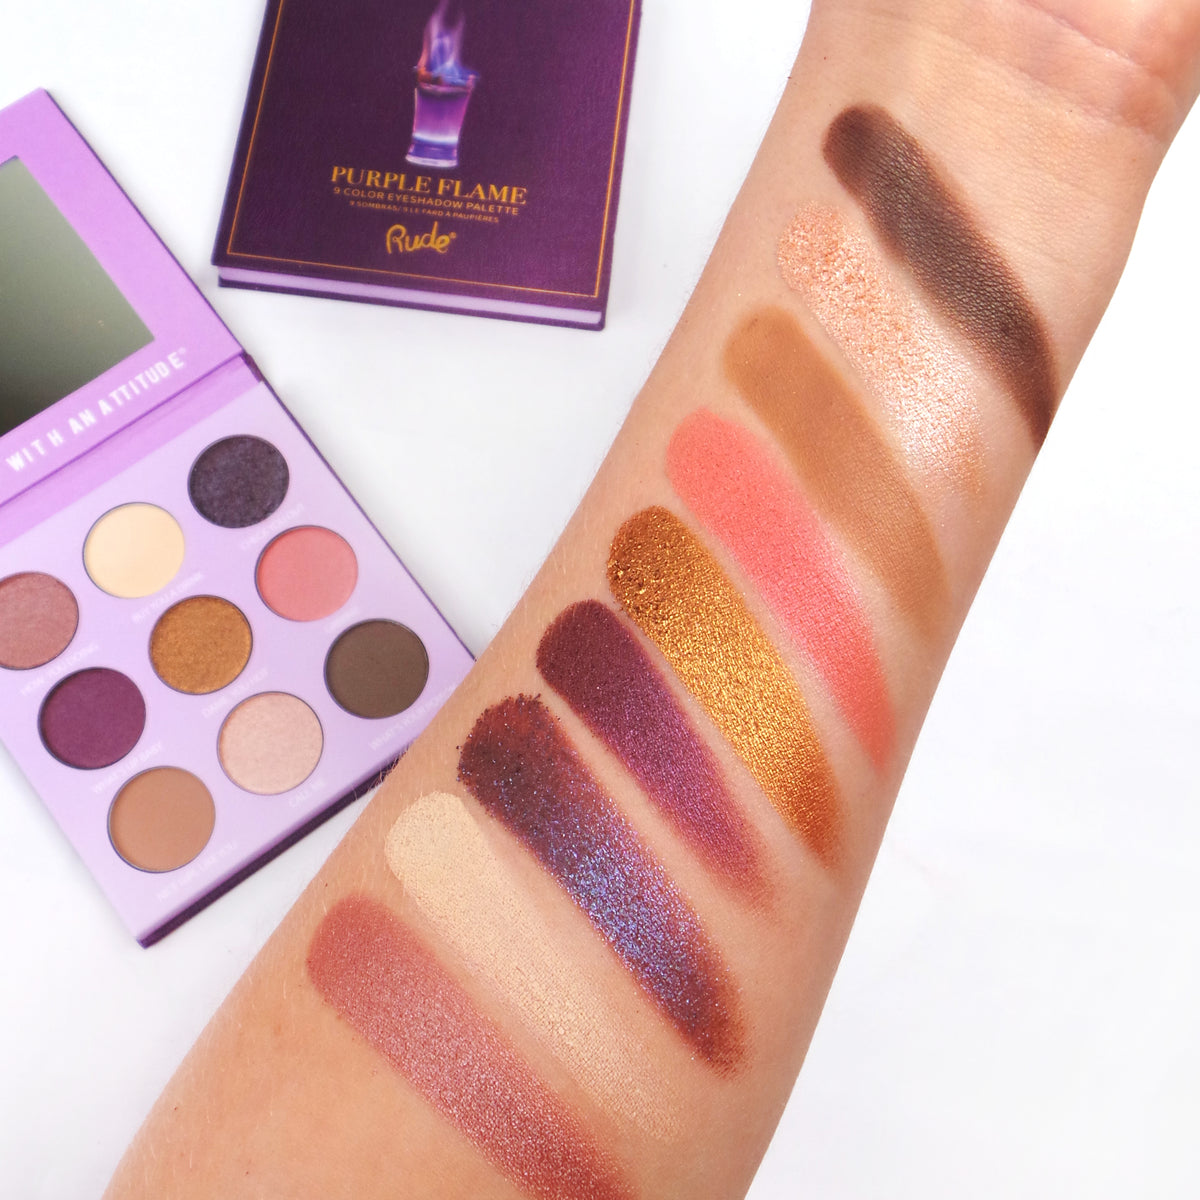 Cocktail Party 9 Eyeshadow Palette - Purple Flame